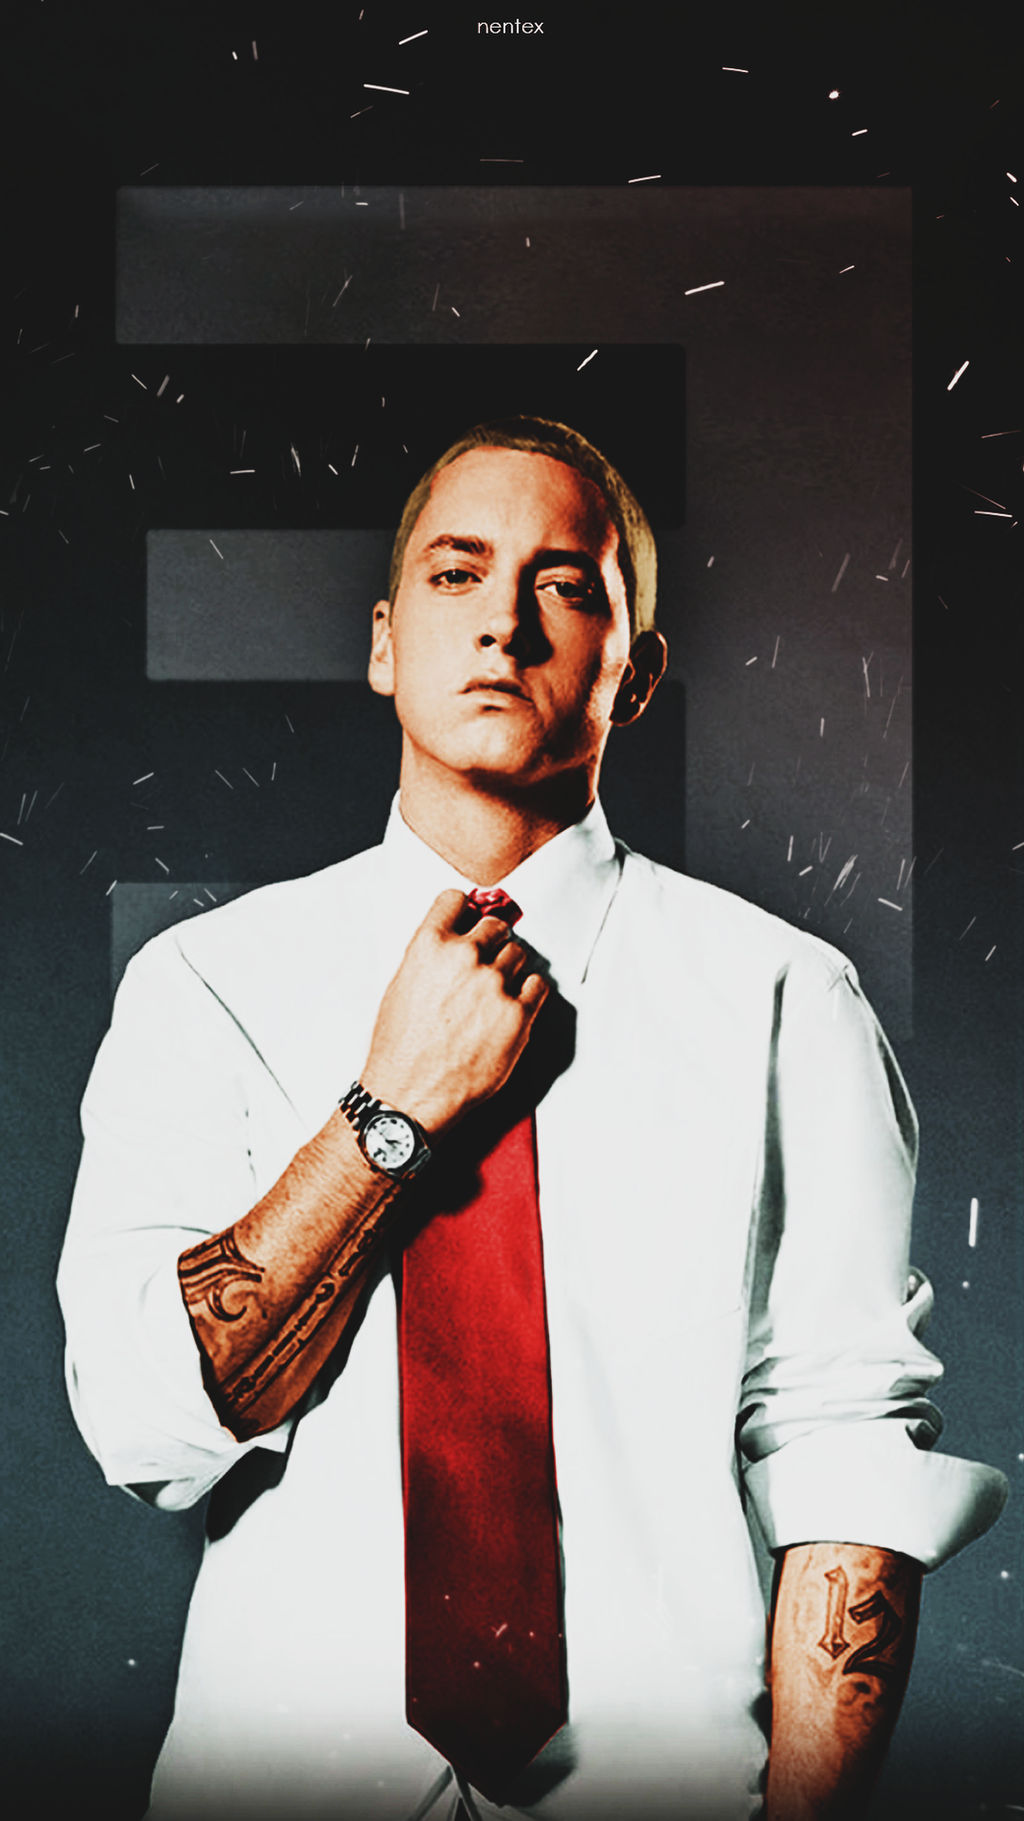 Mobile wallpaper eminem by enihal on